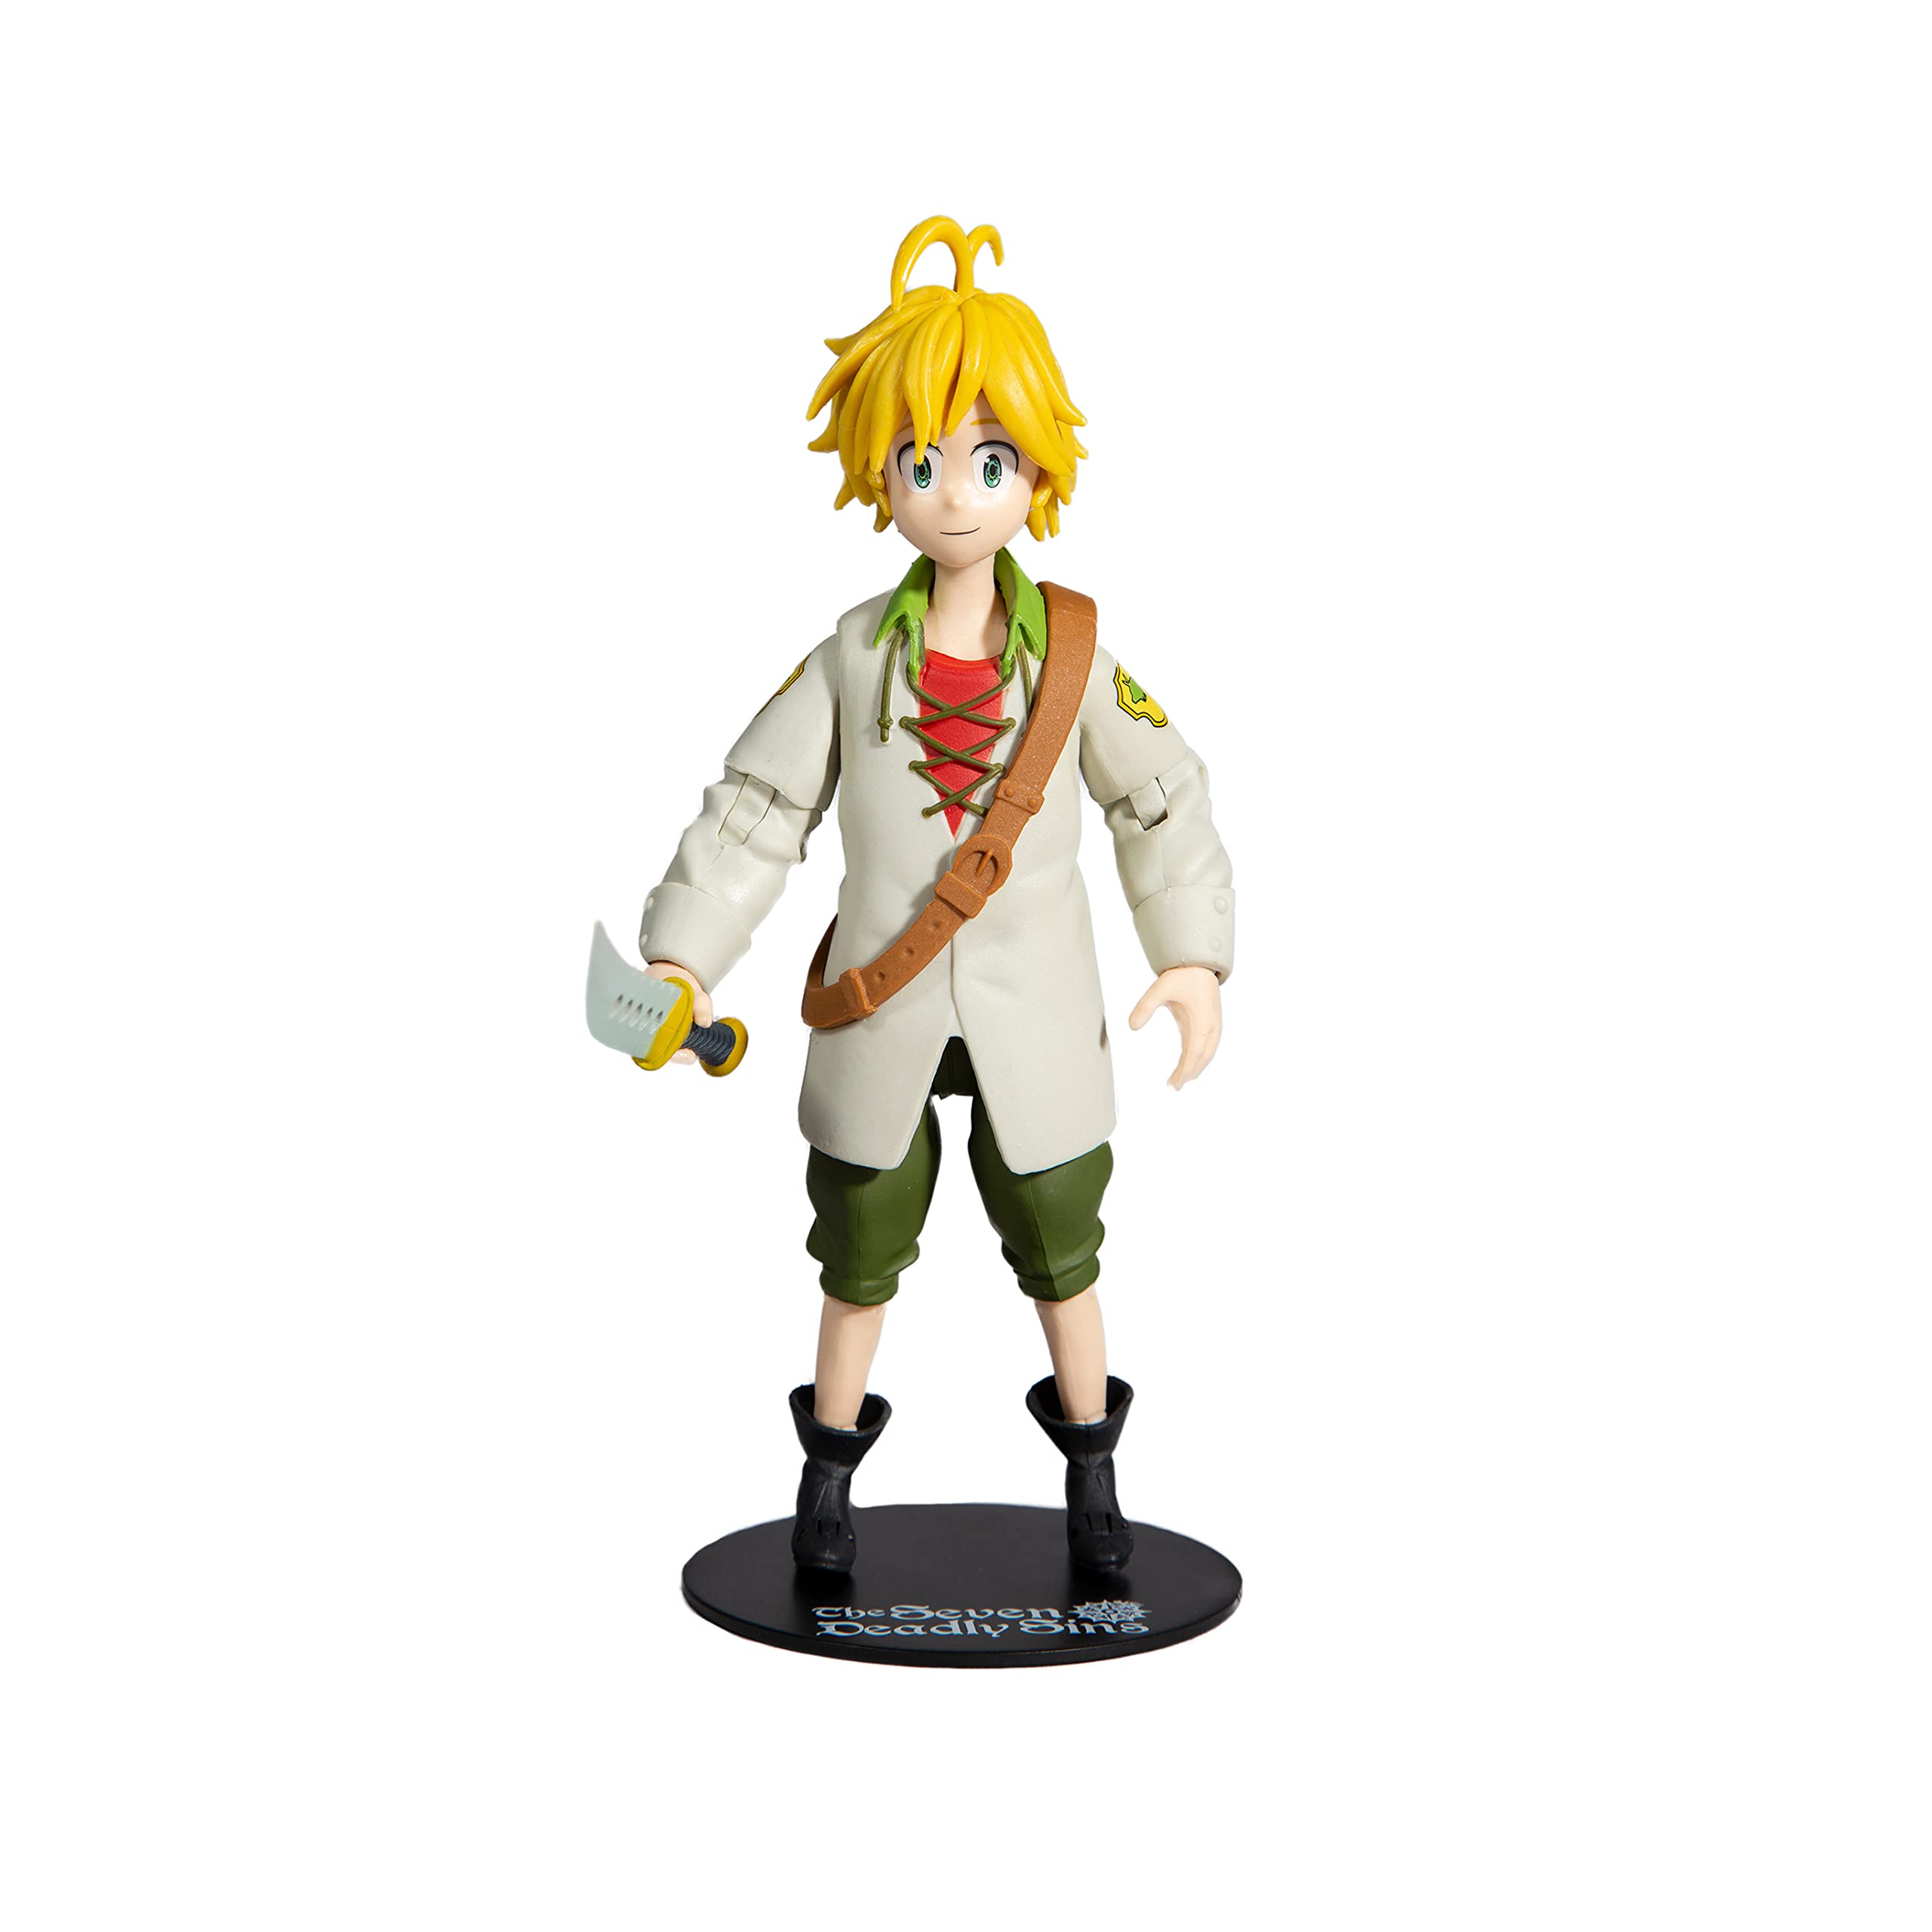 7'' McFarlane Toys The Seven Deadly Sins Action Figures w/ Accessories: Meliodas $6.85, Ban $8.50 + Free Shipping w/ Prime or on $35+